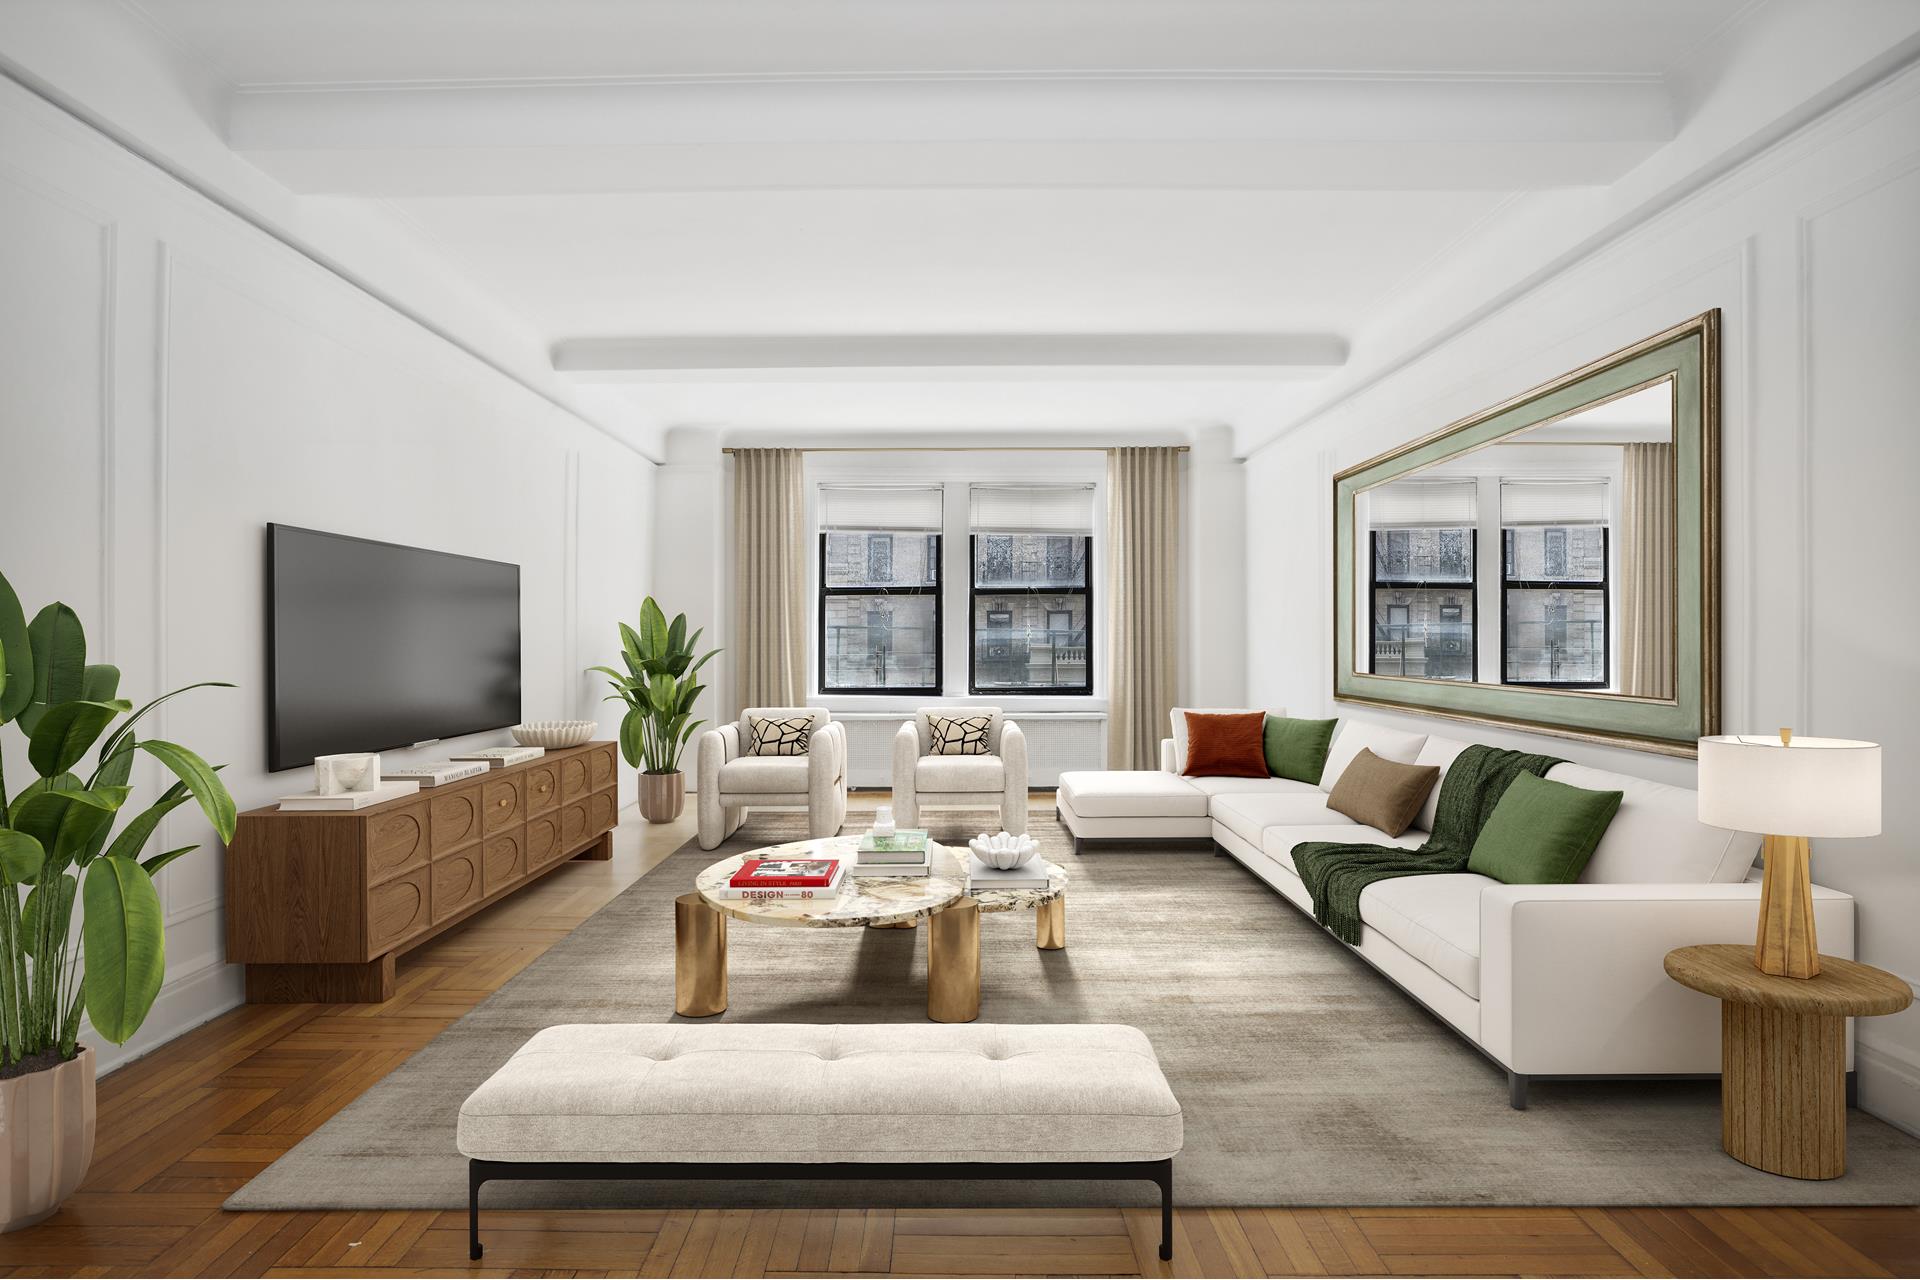 845 West End Avenue 2A, Upper West Side, Upper West Side, NYC - 4 Bedrooms  
3.5 Bathrooms  
8 Rooms - 